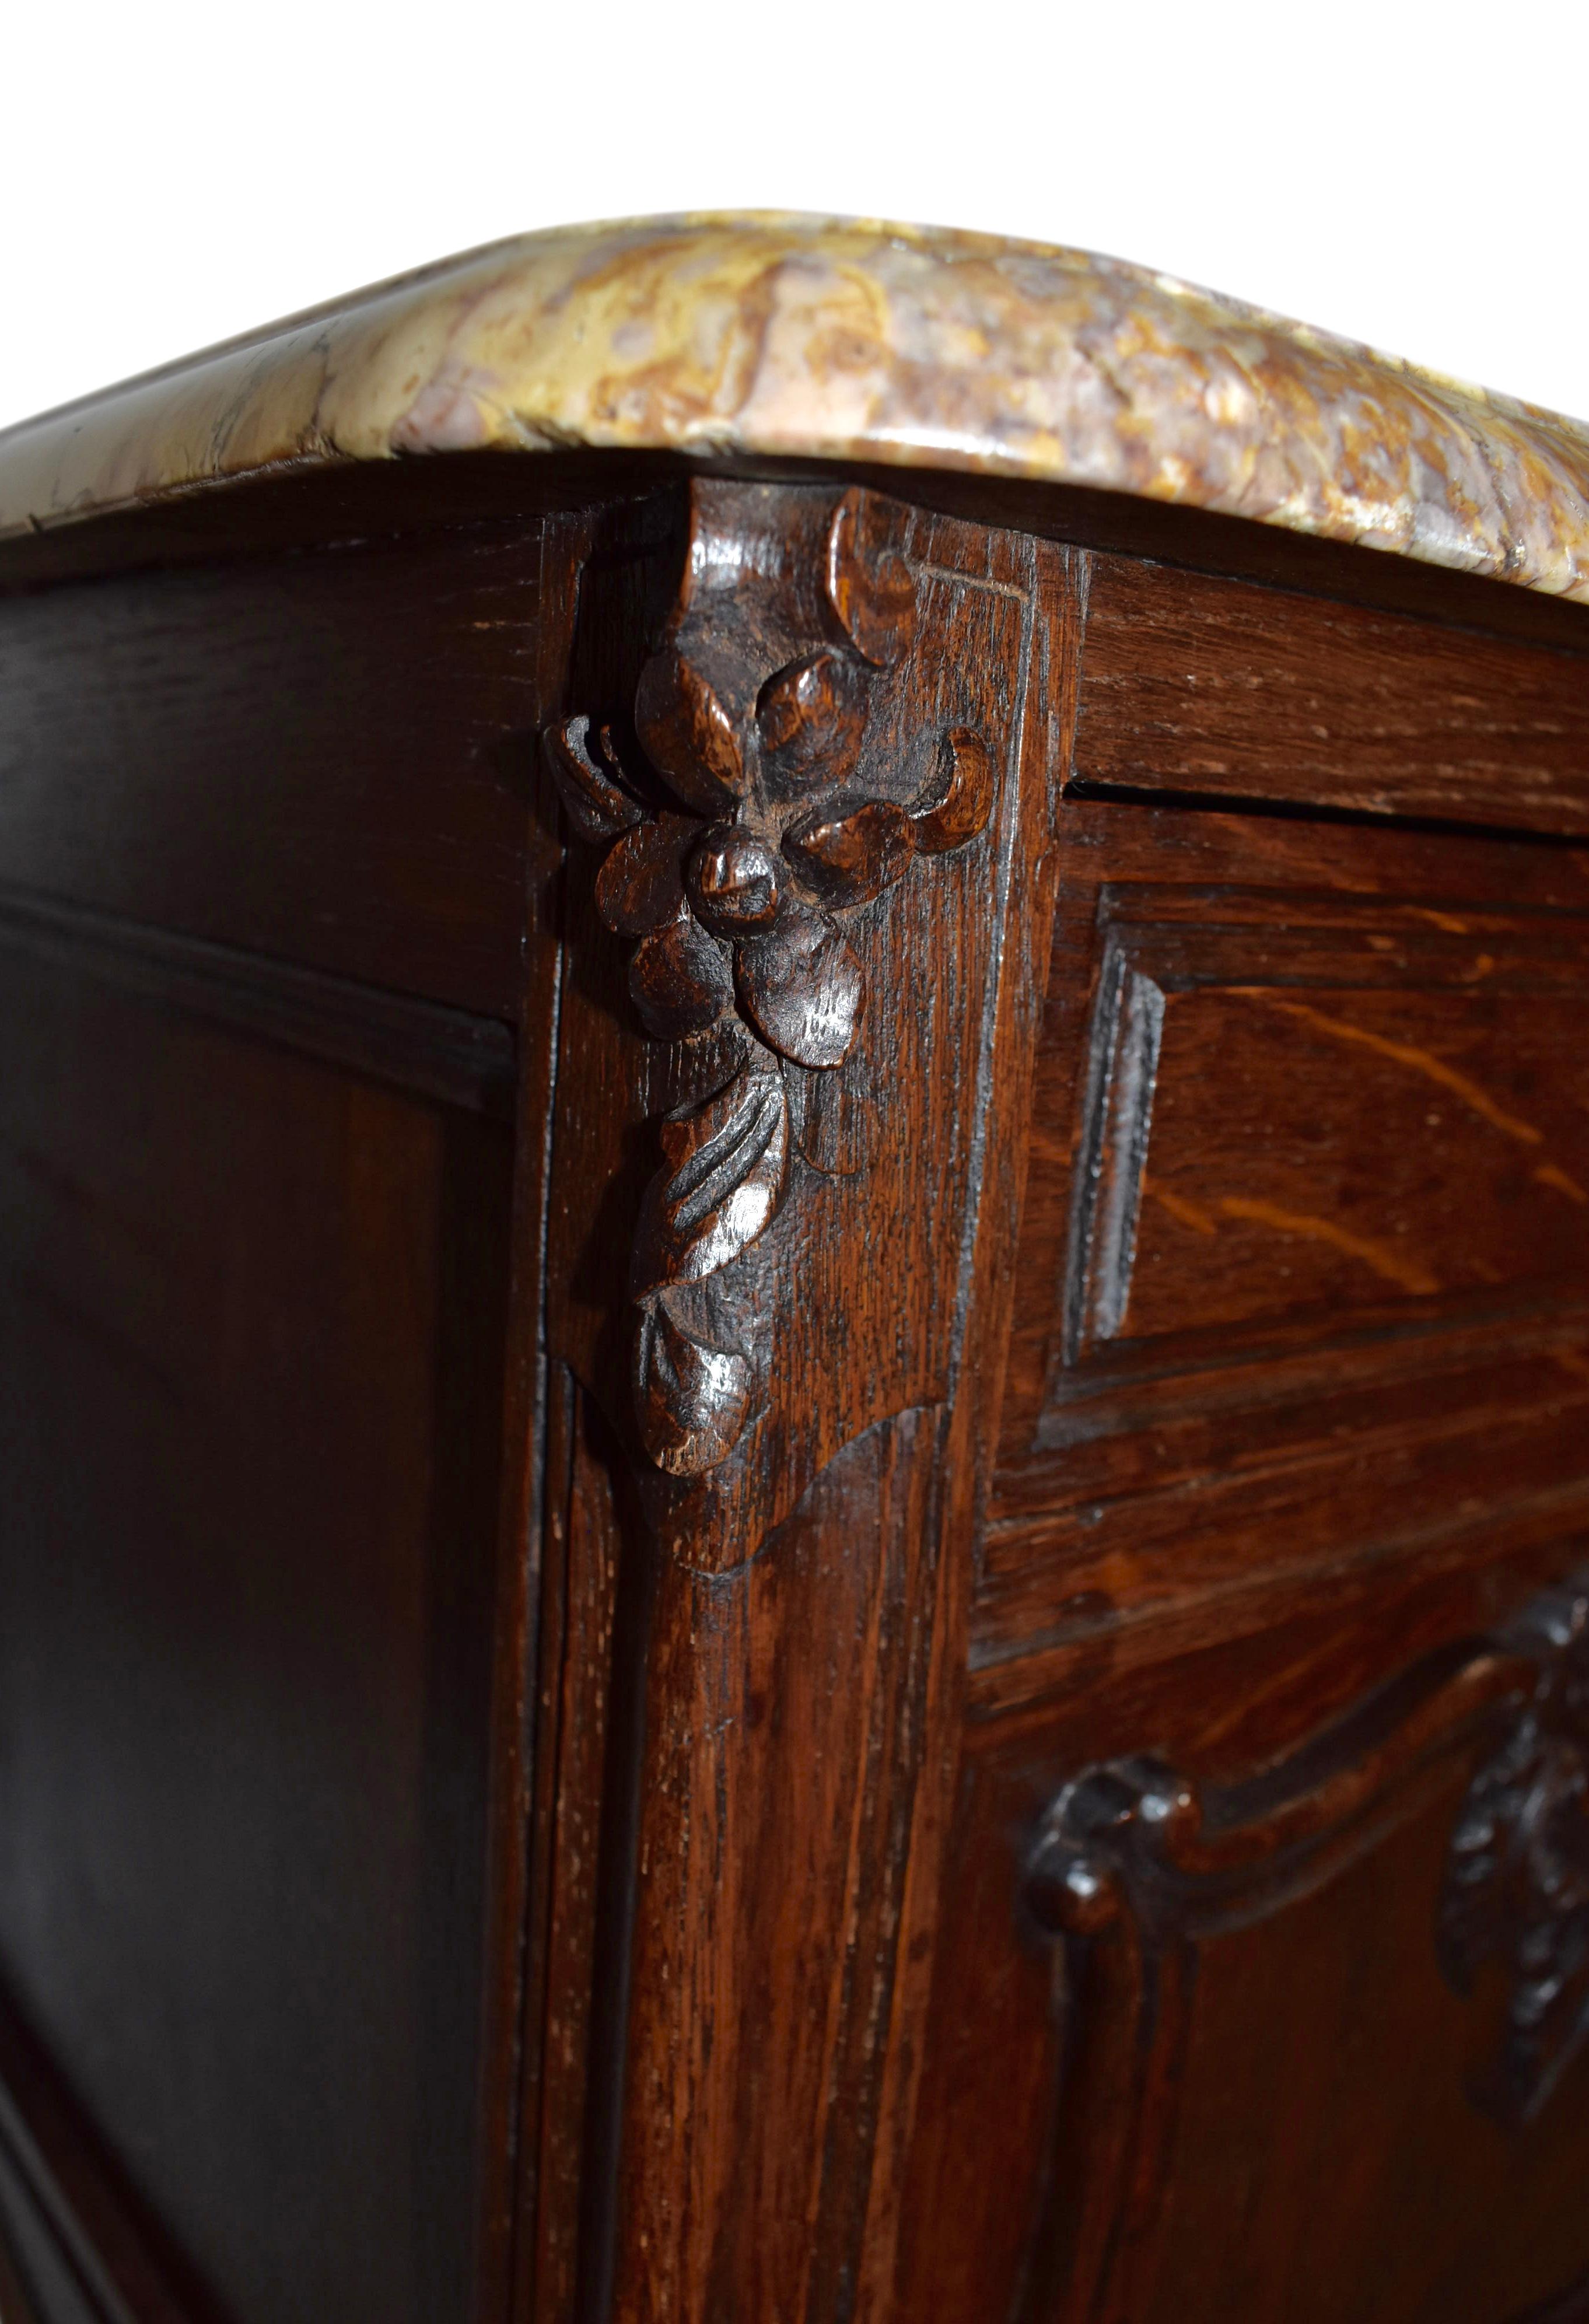 Belgian Pair of Carved Oak Nightstand Bedside Tables with Mable Tops, Circa 1900 For Sale